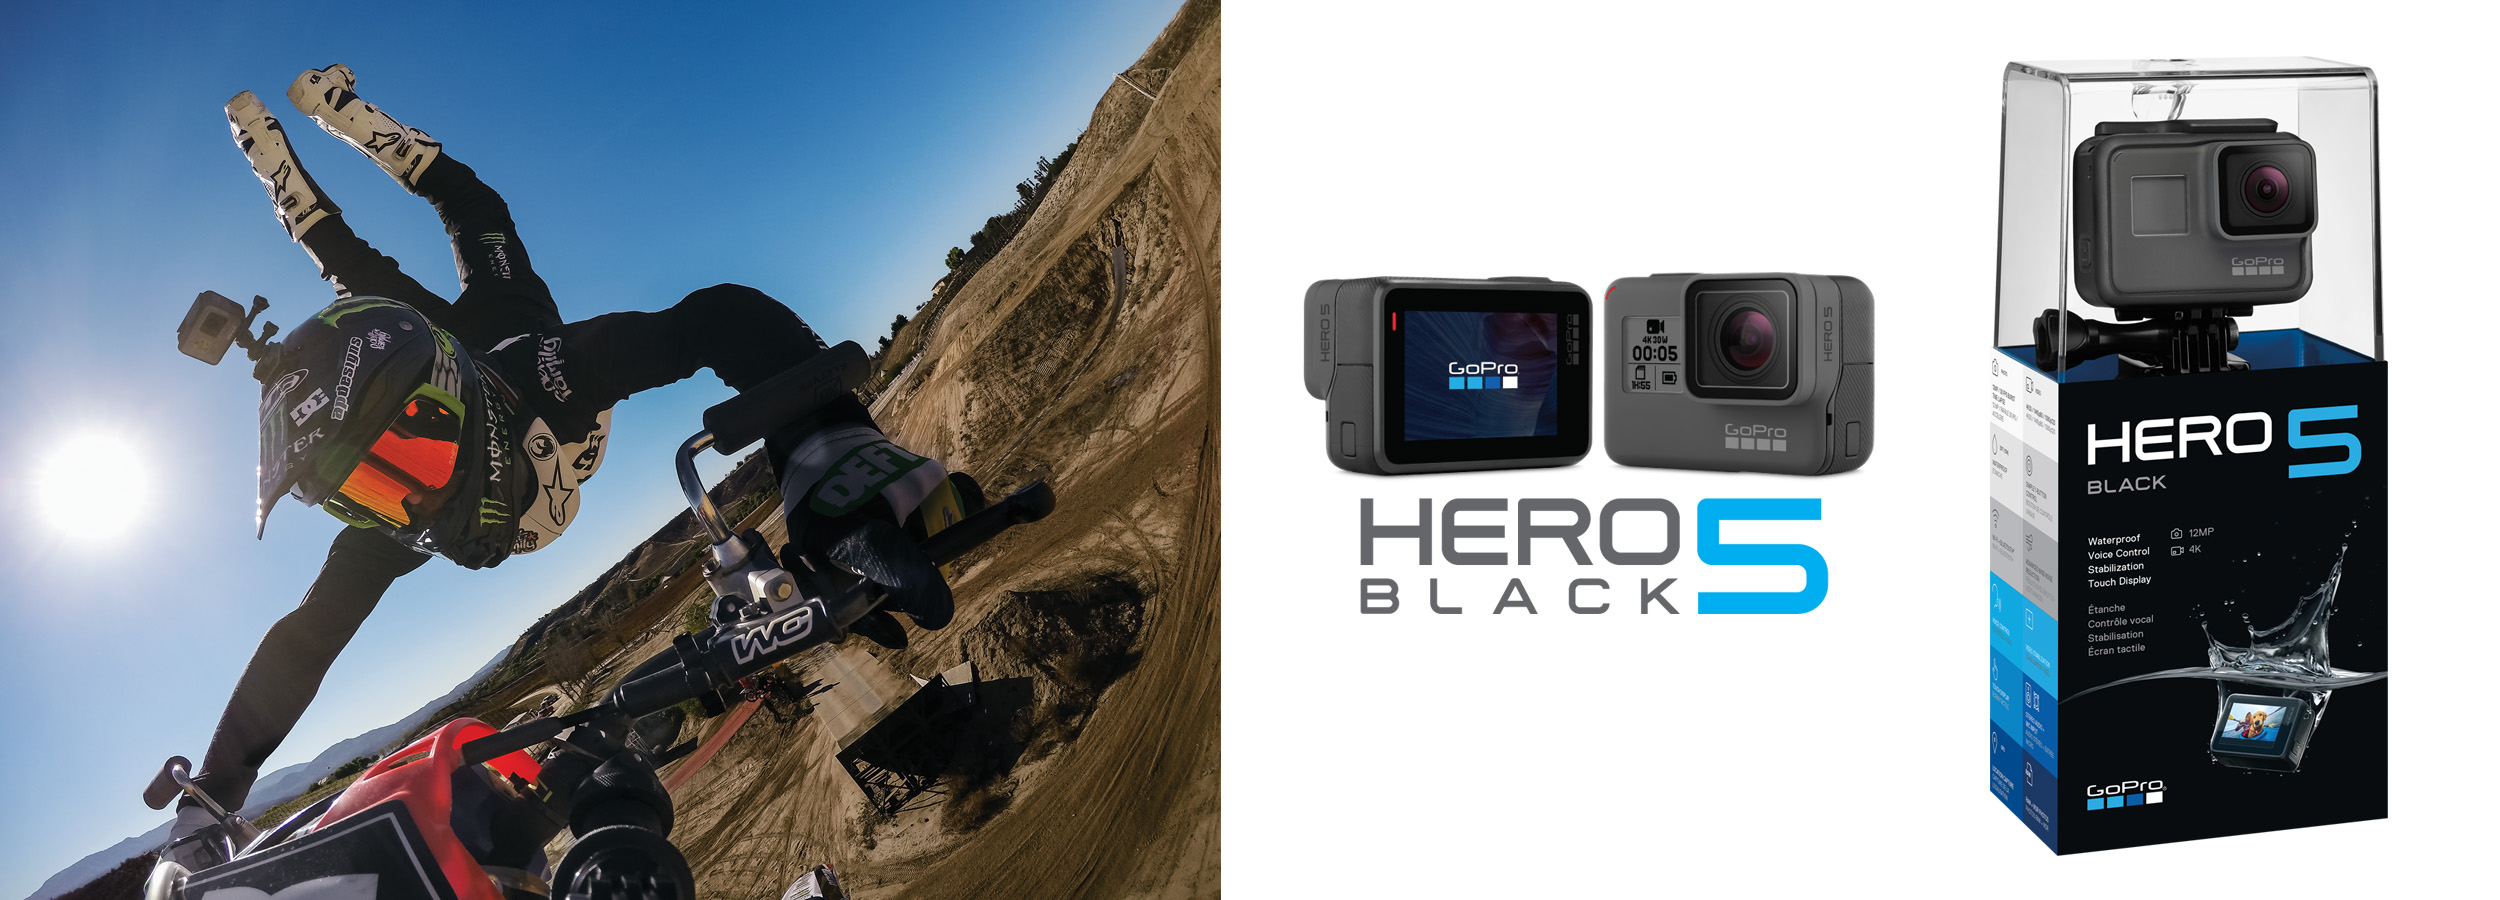 Gopro Now An End To End Storytelling Solution With Cloud Connected Hero5 Cameras Gopro Plus Subscription Service Quik Editing Apps